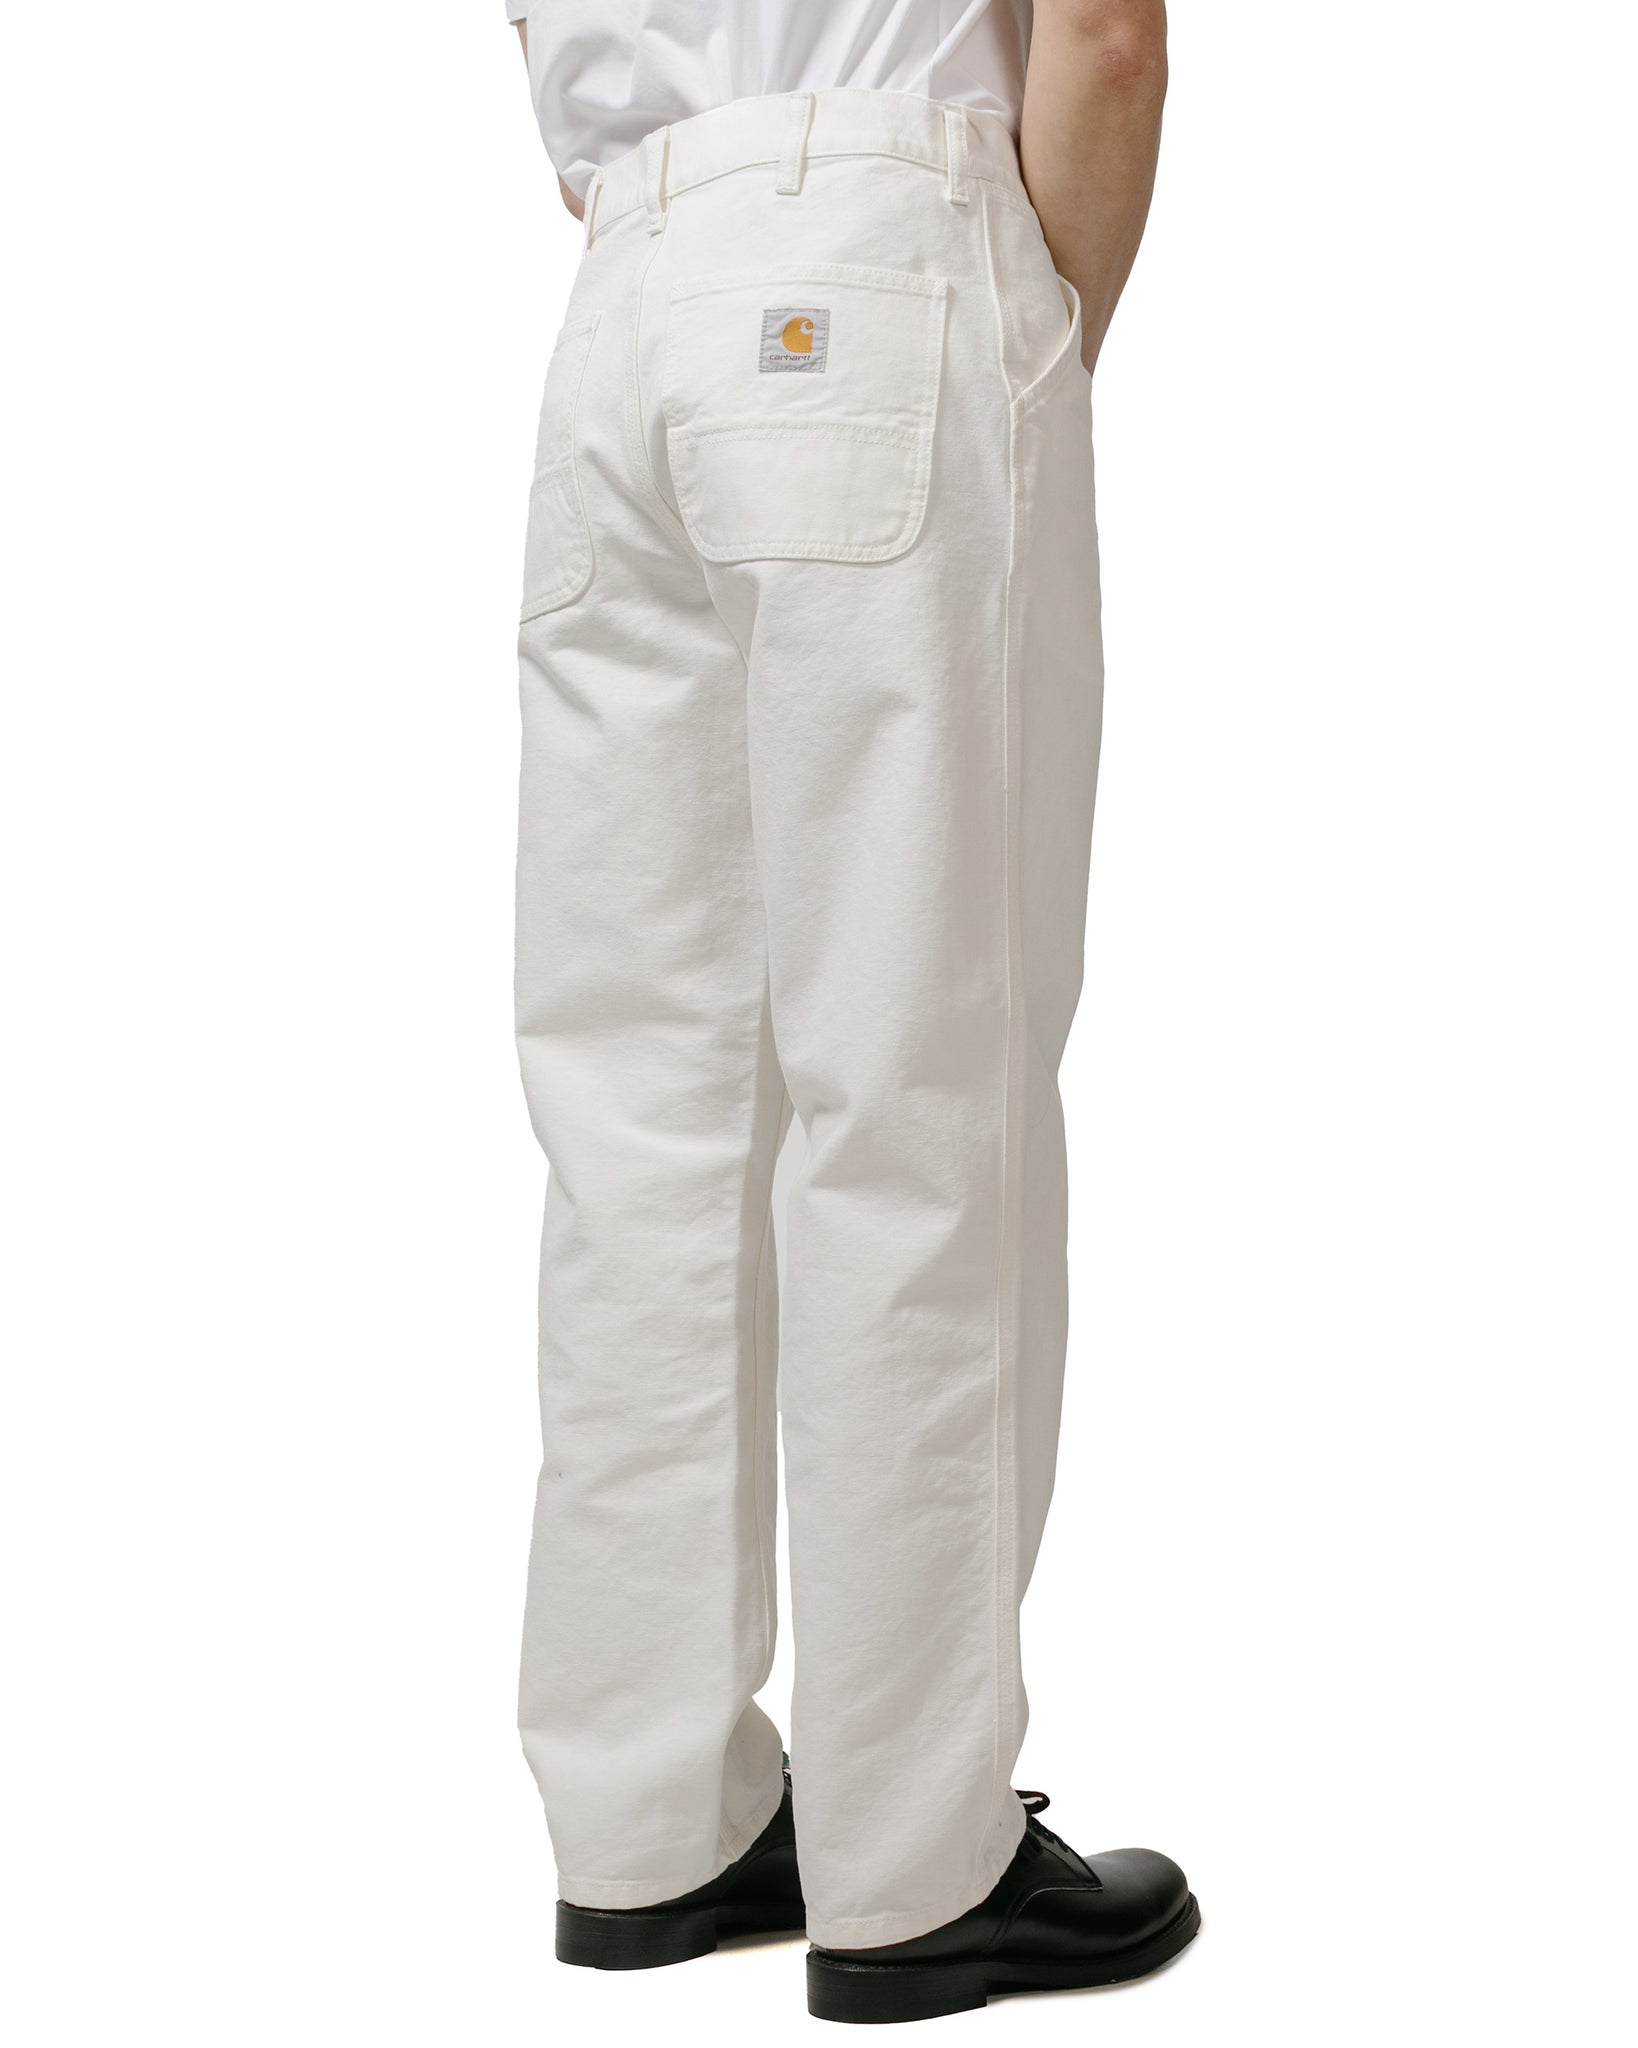 Carhartt W.I.P. Simple Pant Canvas Wax Rinsed model back